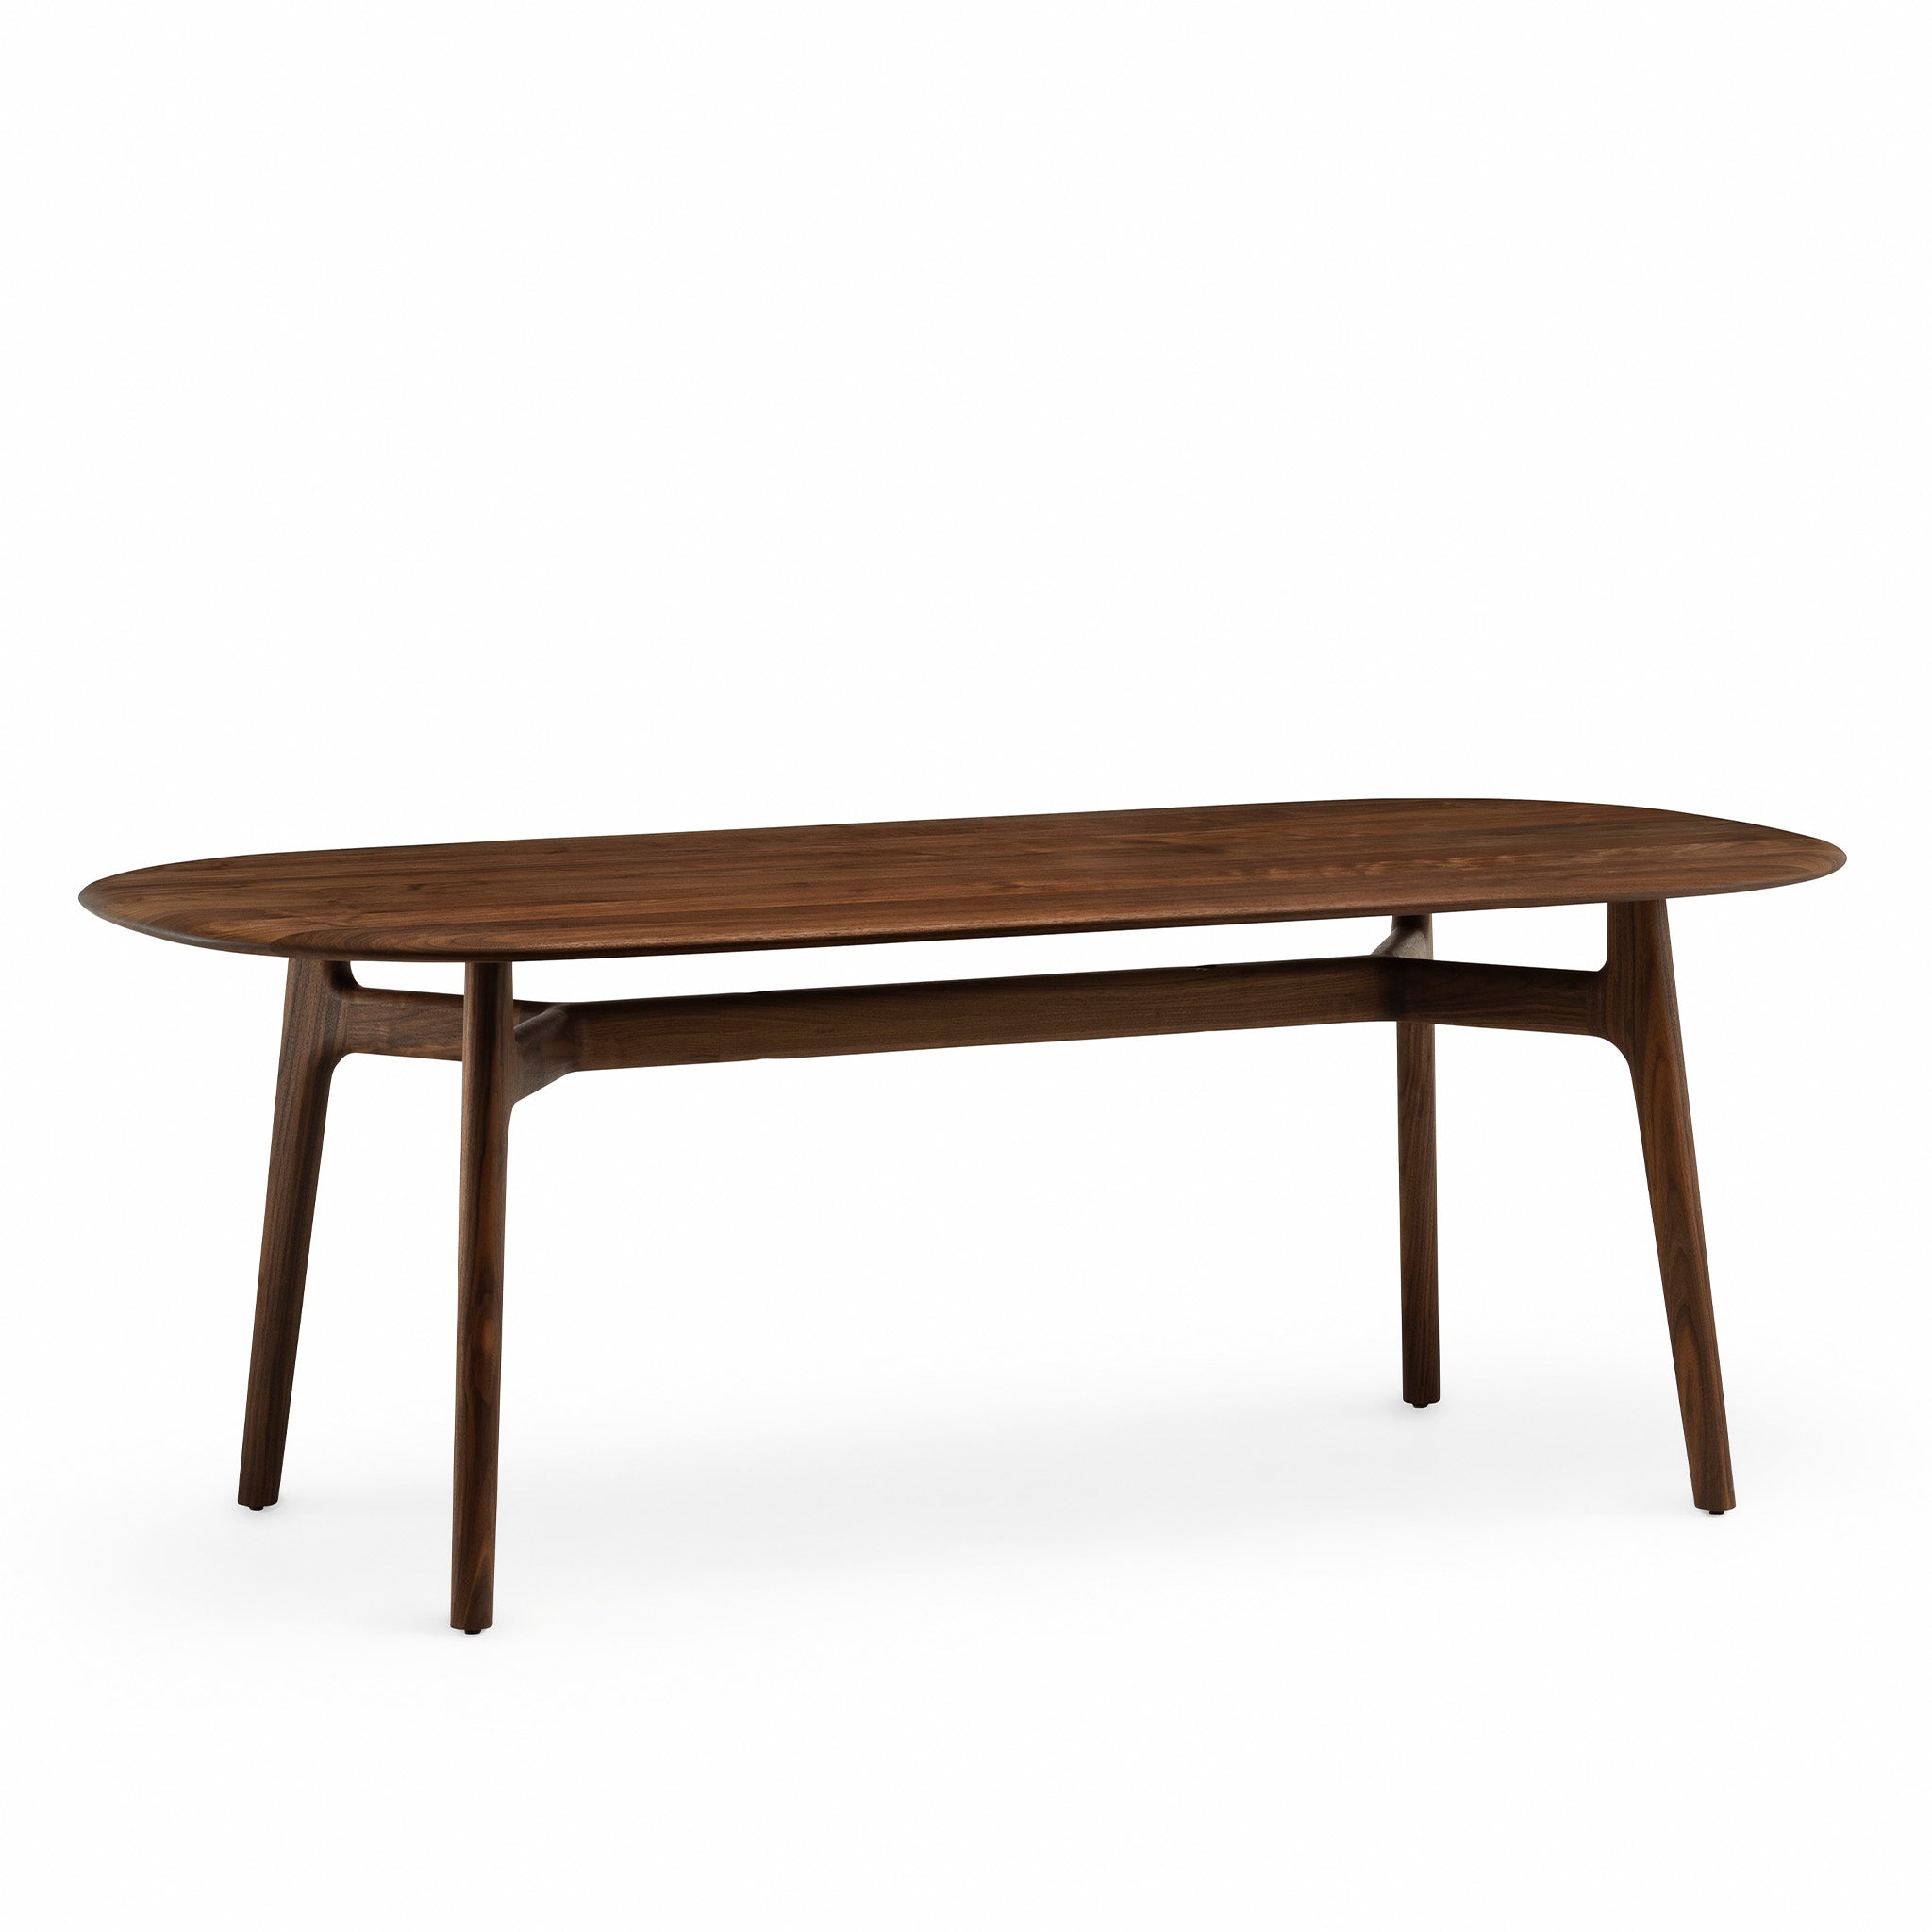 Solo Oblong Table by Neri & Hu